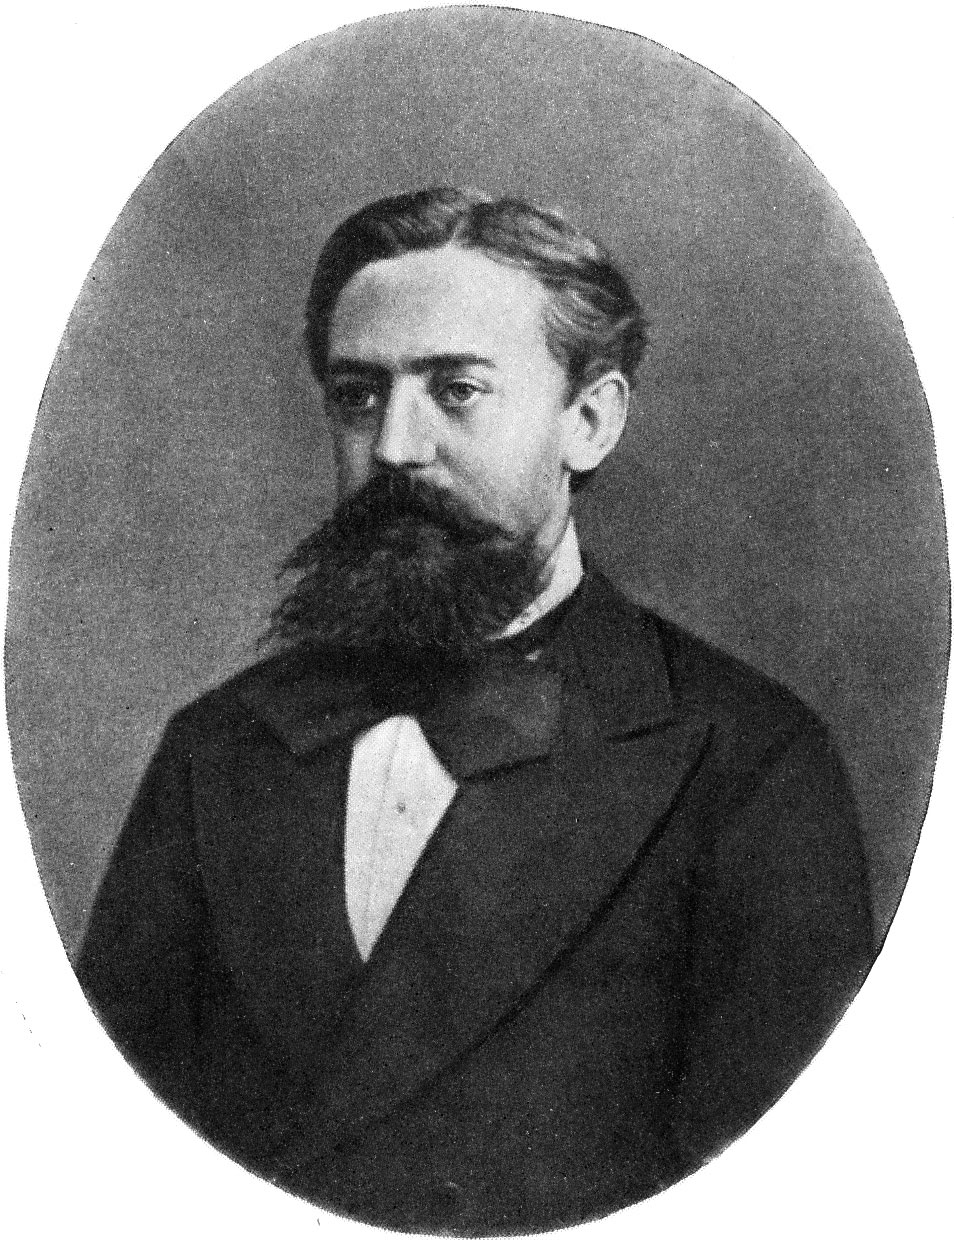 Andrey Markov (1856–1922), photographer unknown, public domain, https://commons.wikimedia.org/w/index.php?curid=1332494